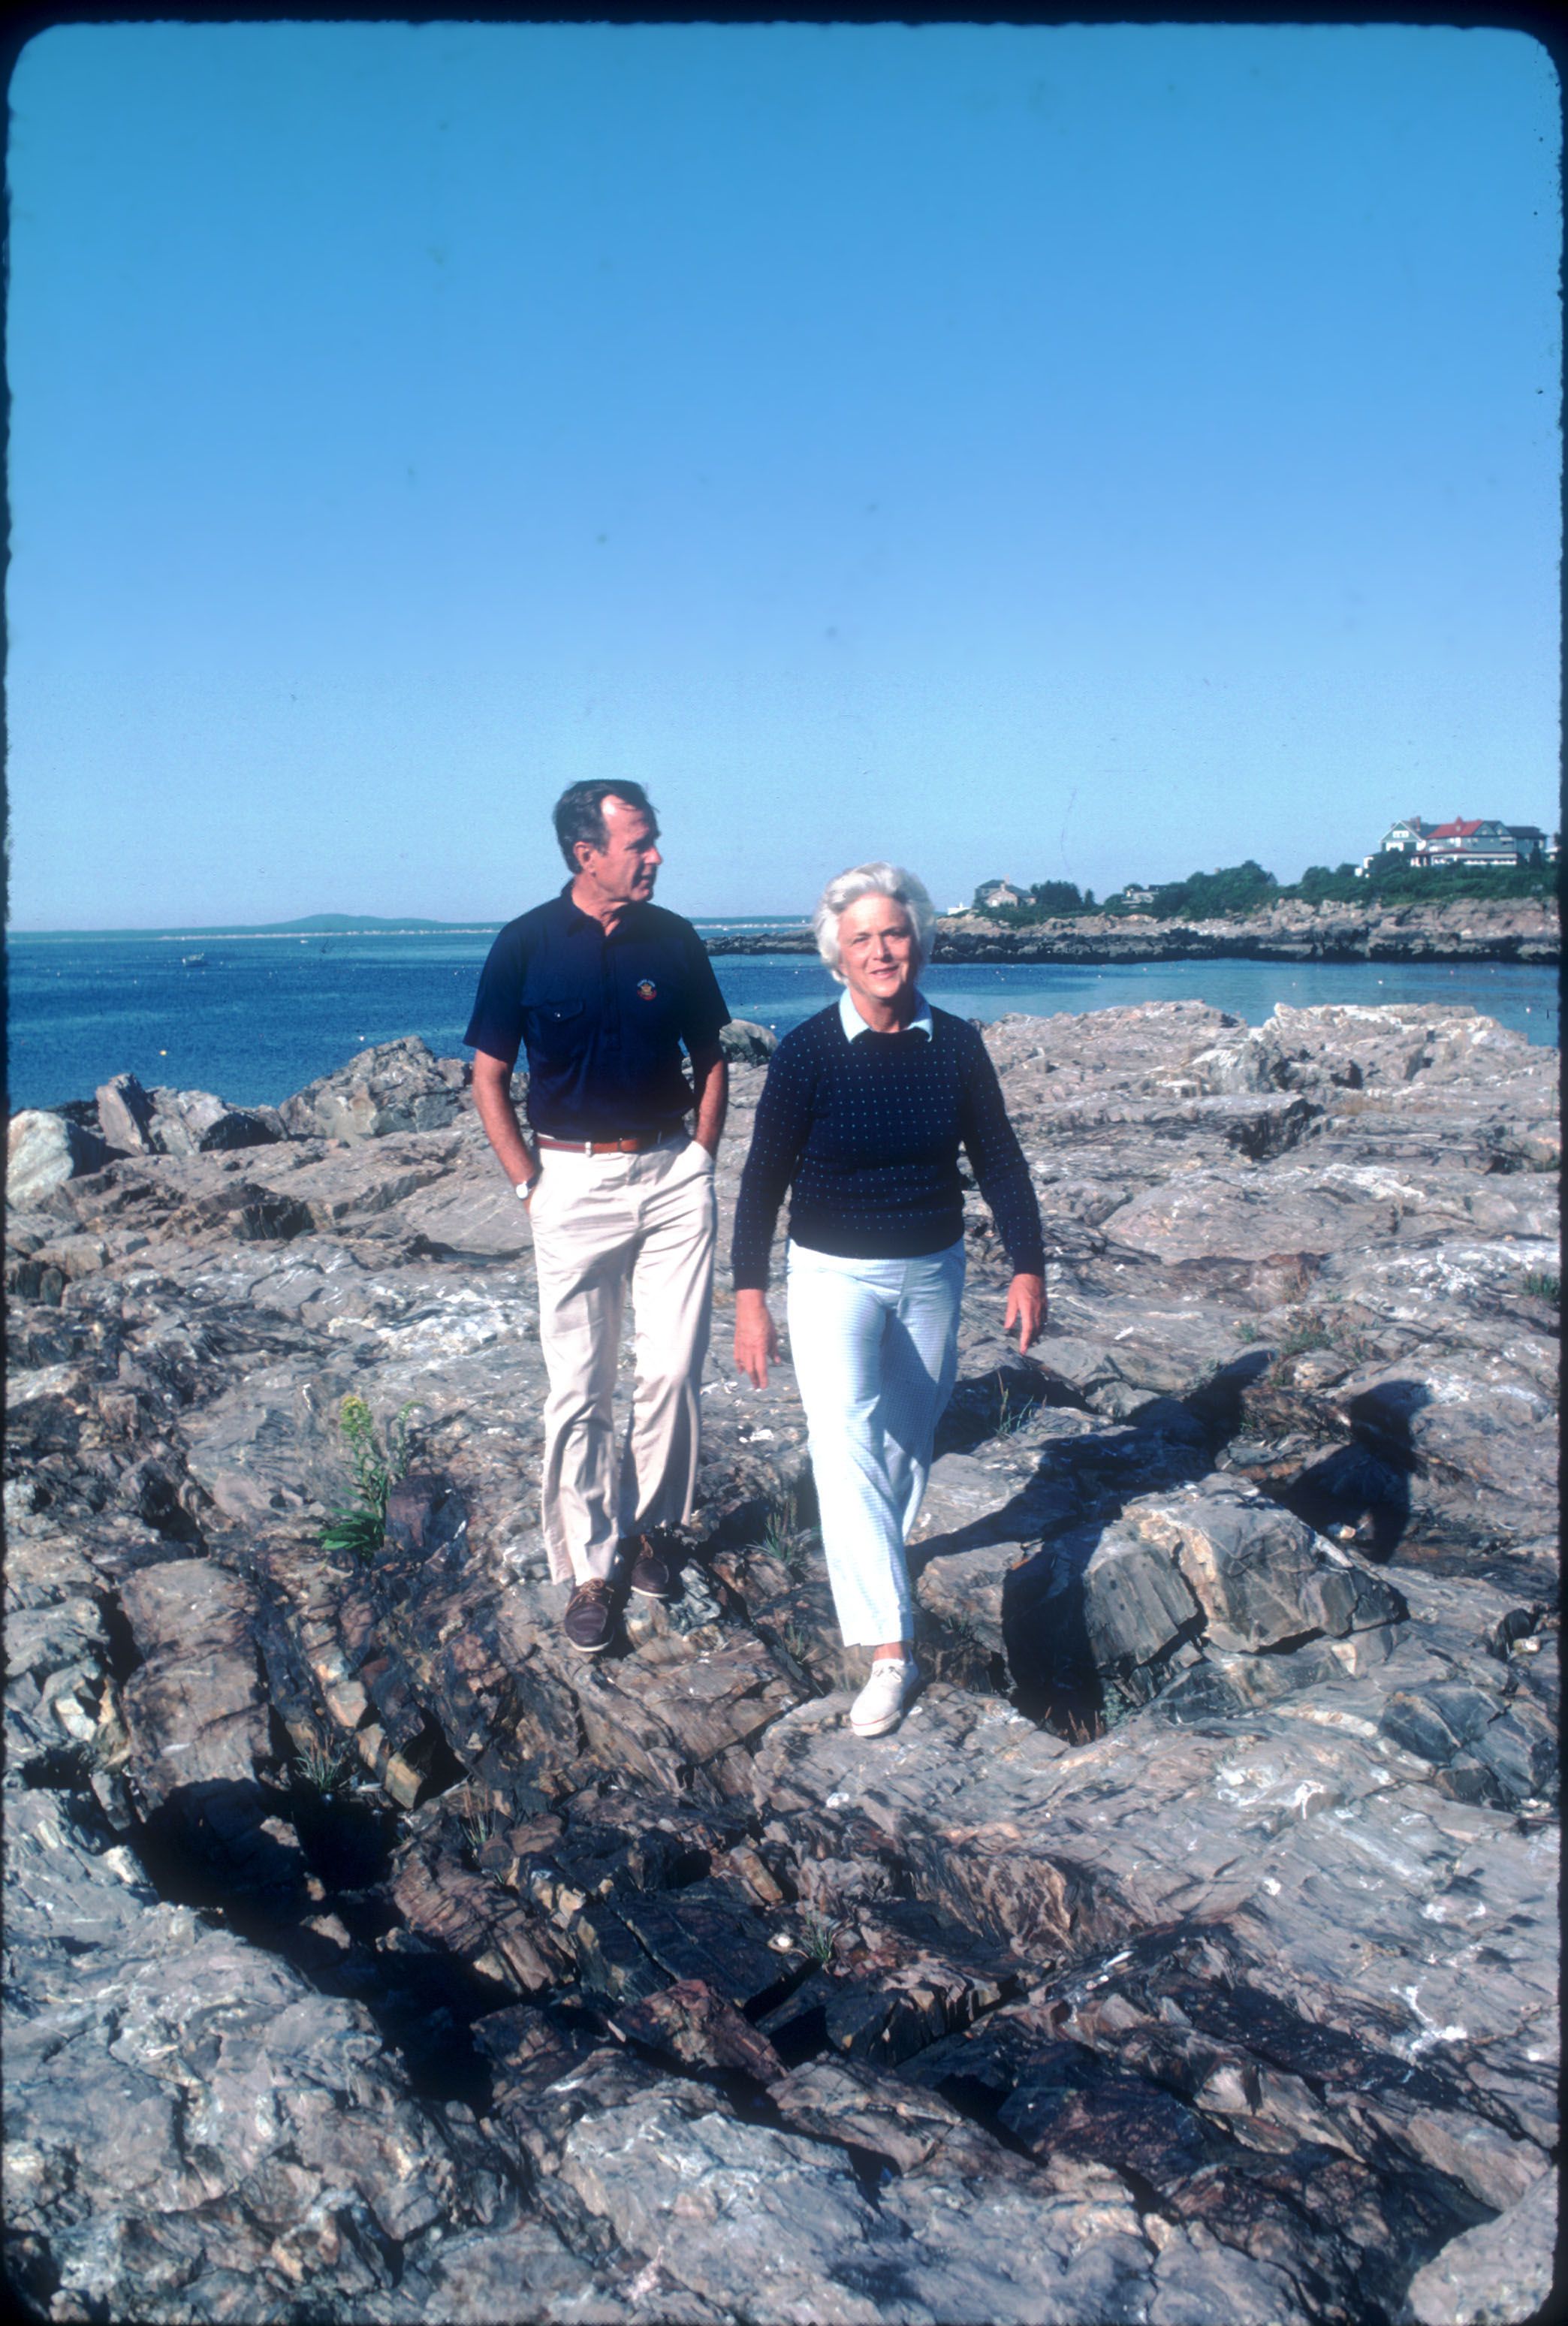 Vice President George Bush and Barbara Bush in August 1983 on vacation in Kennebunkport, ME. | Source: Cynthia Johnson/Liaison/Getty Images